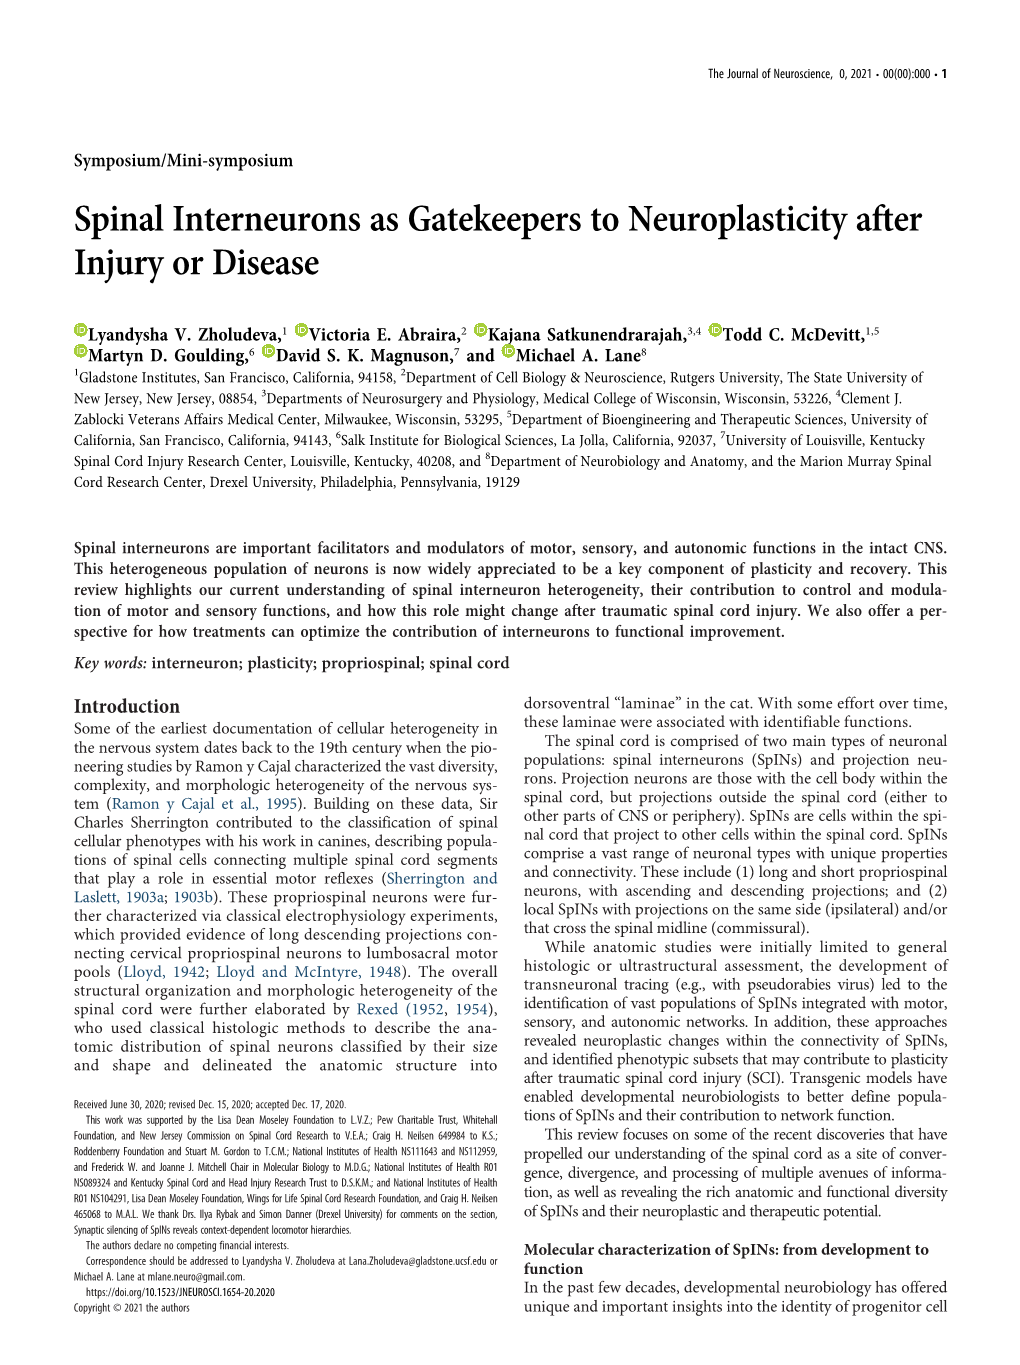 Spinal Interneurons As Gatekeepers to Neuroplasticity After Injury Or Disease